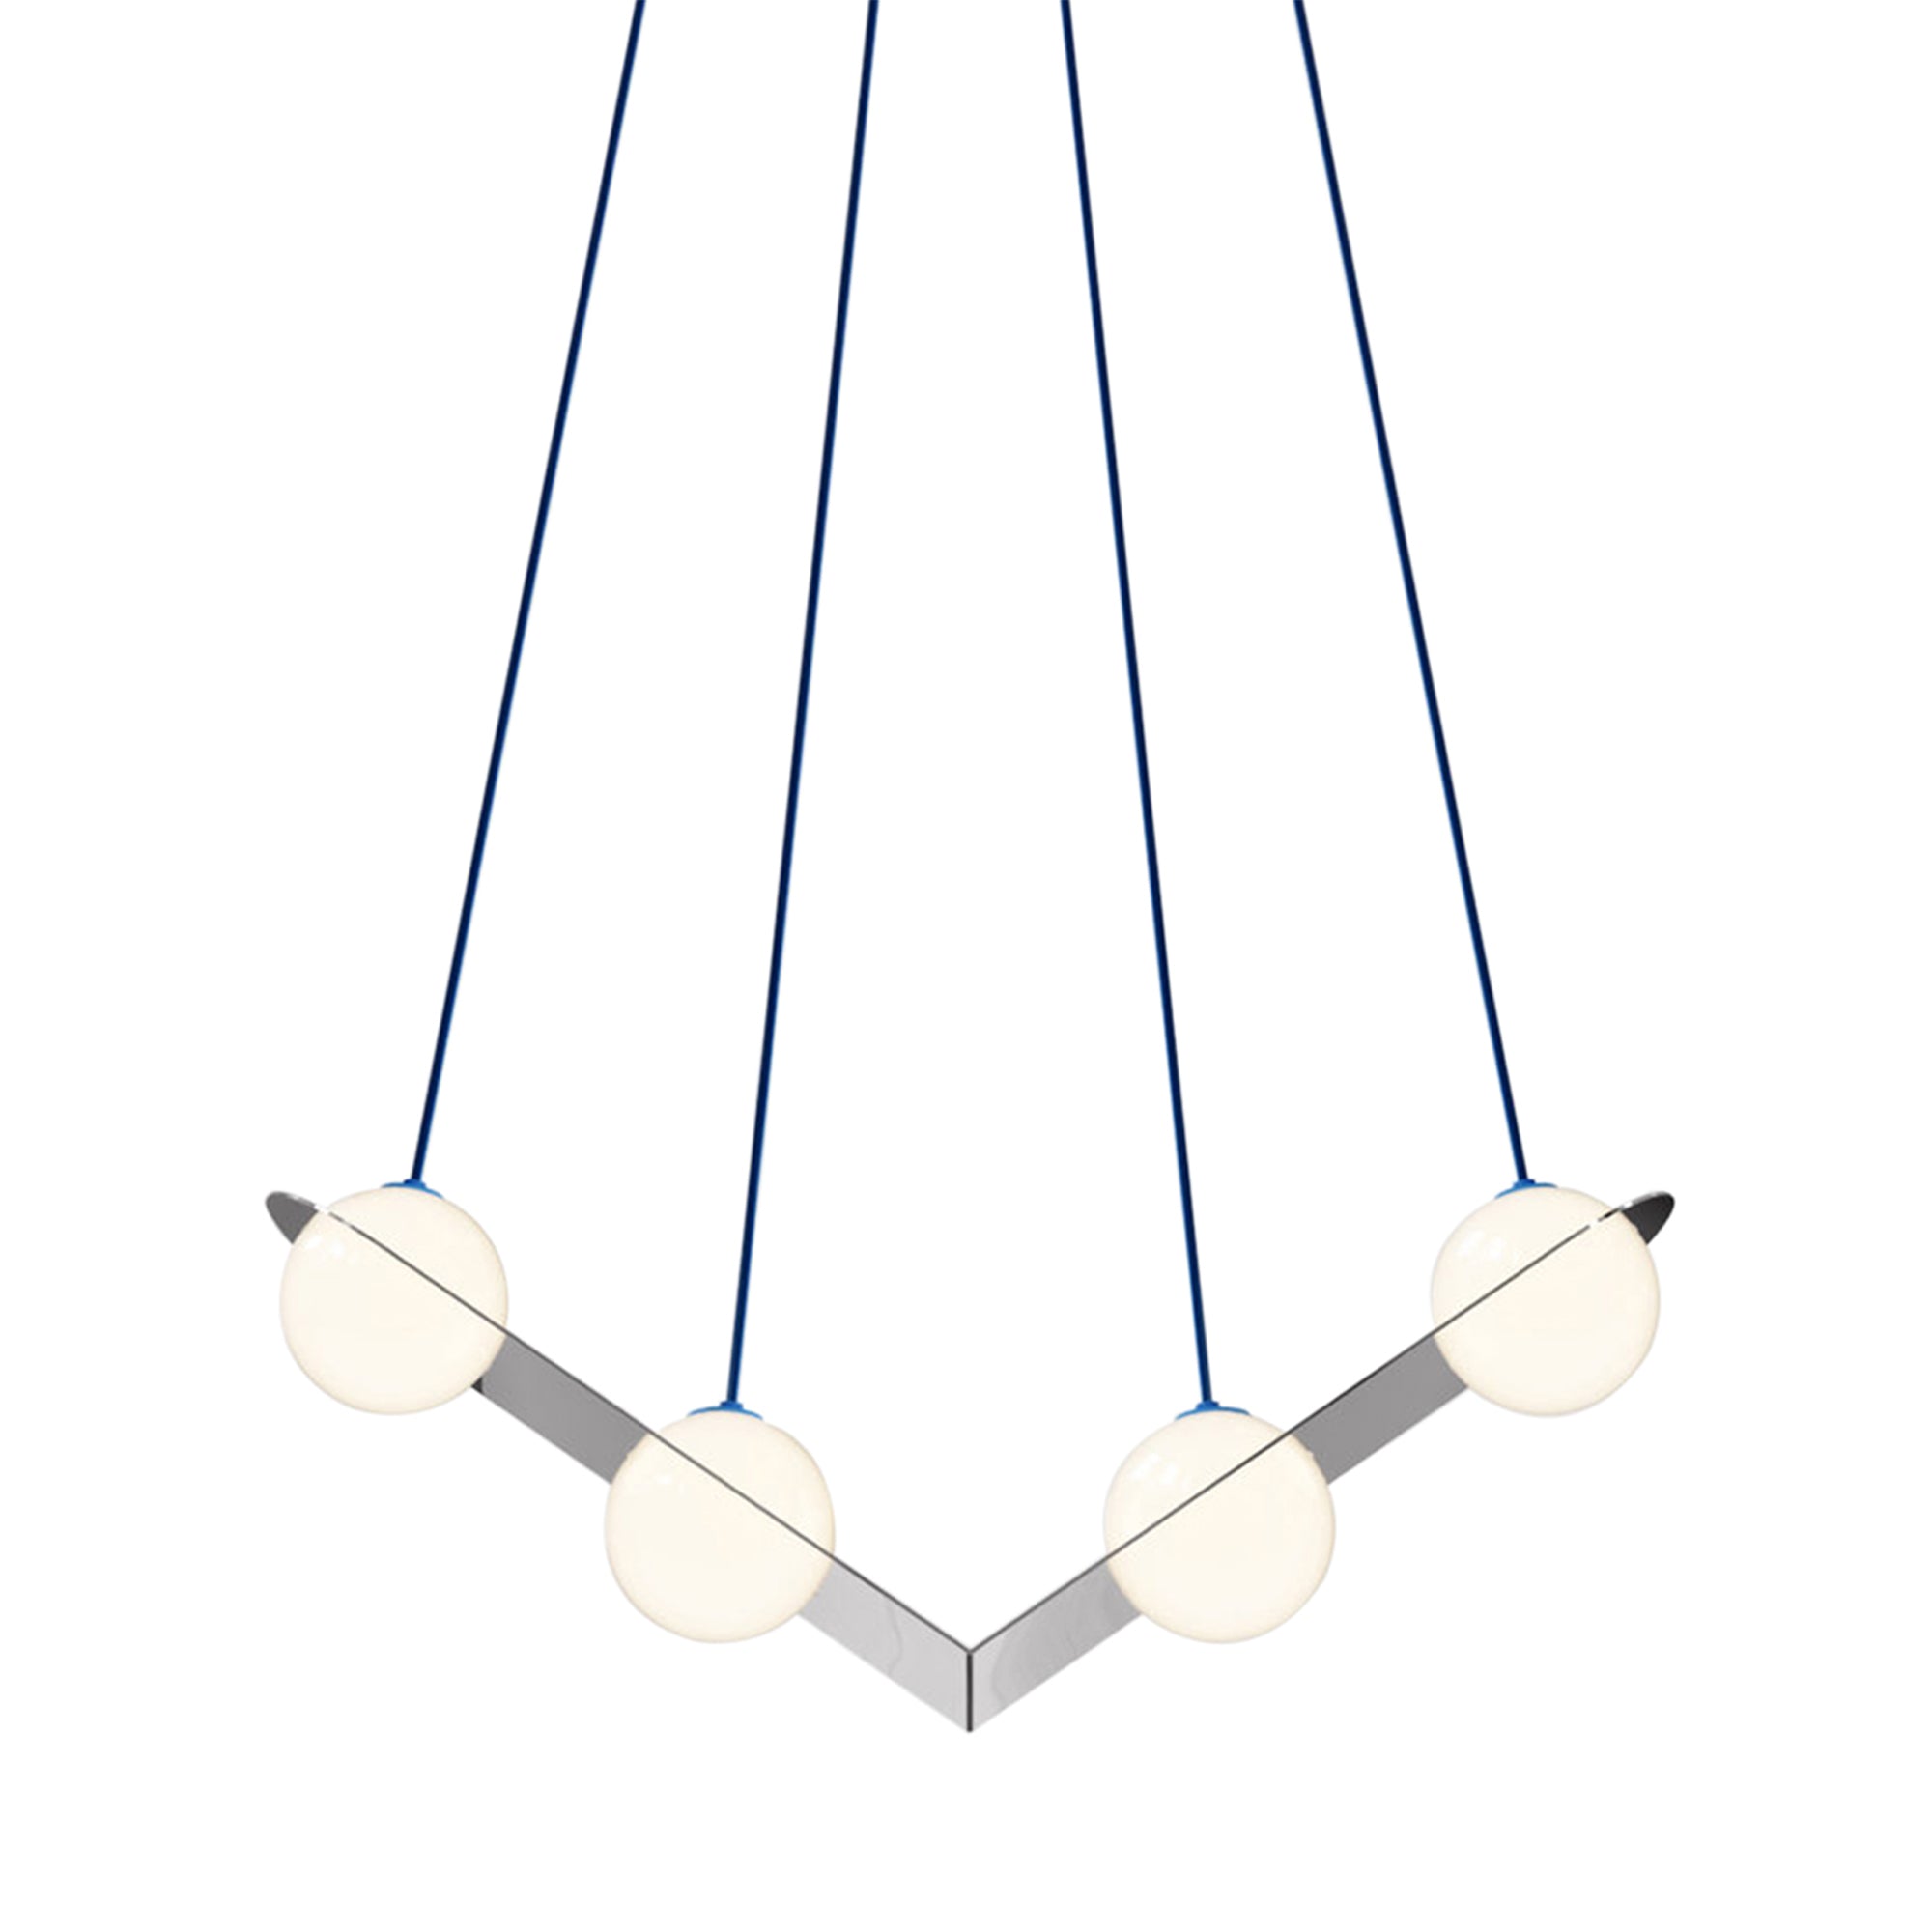 Laurent 02 Suspension Lamp: Nickel Plated + Blue + Angled Wires